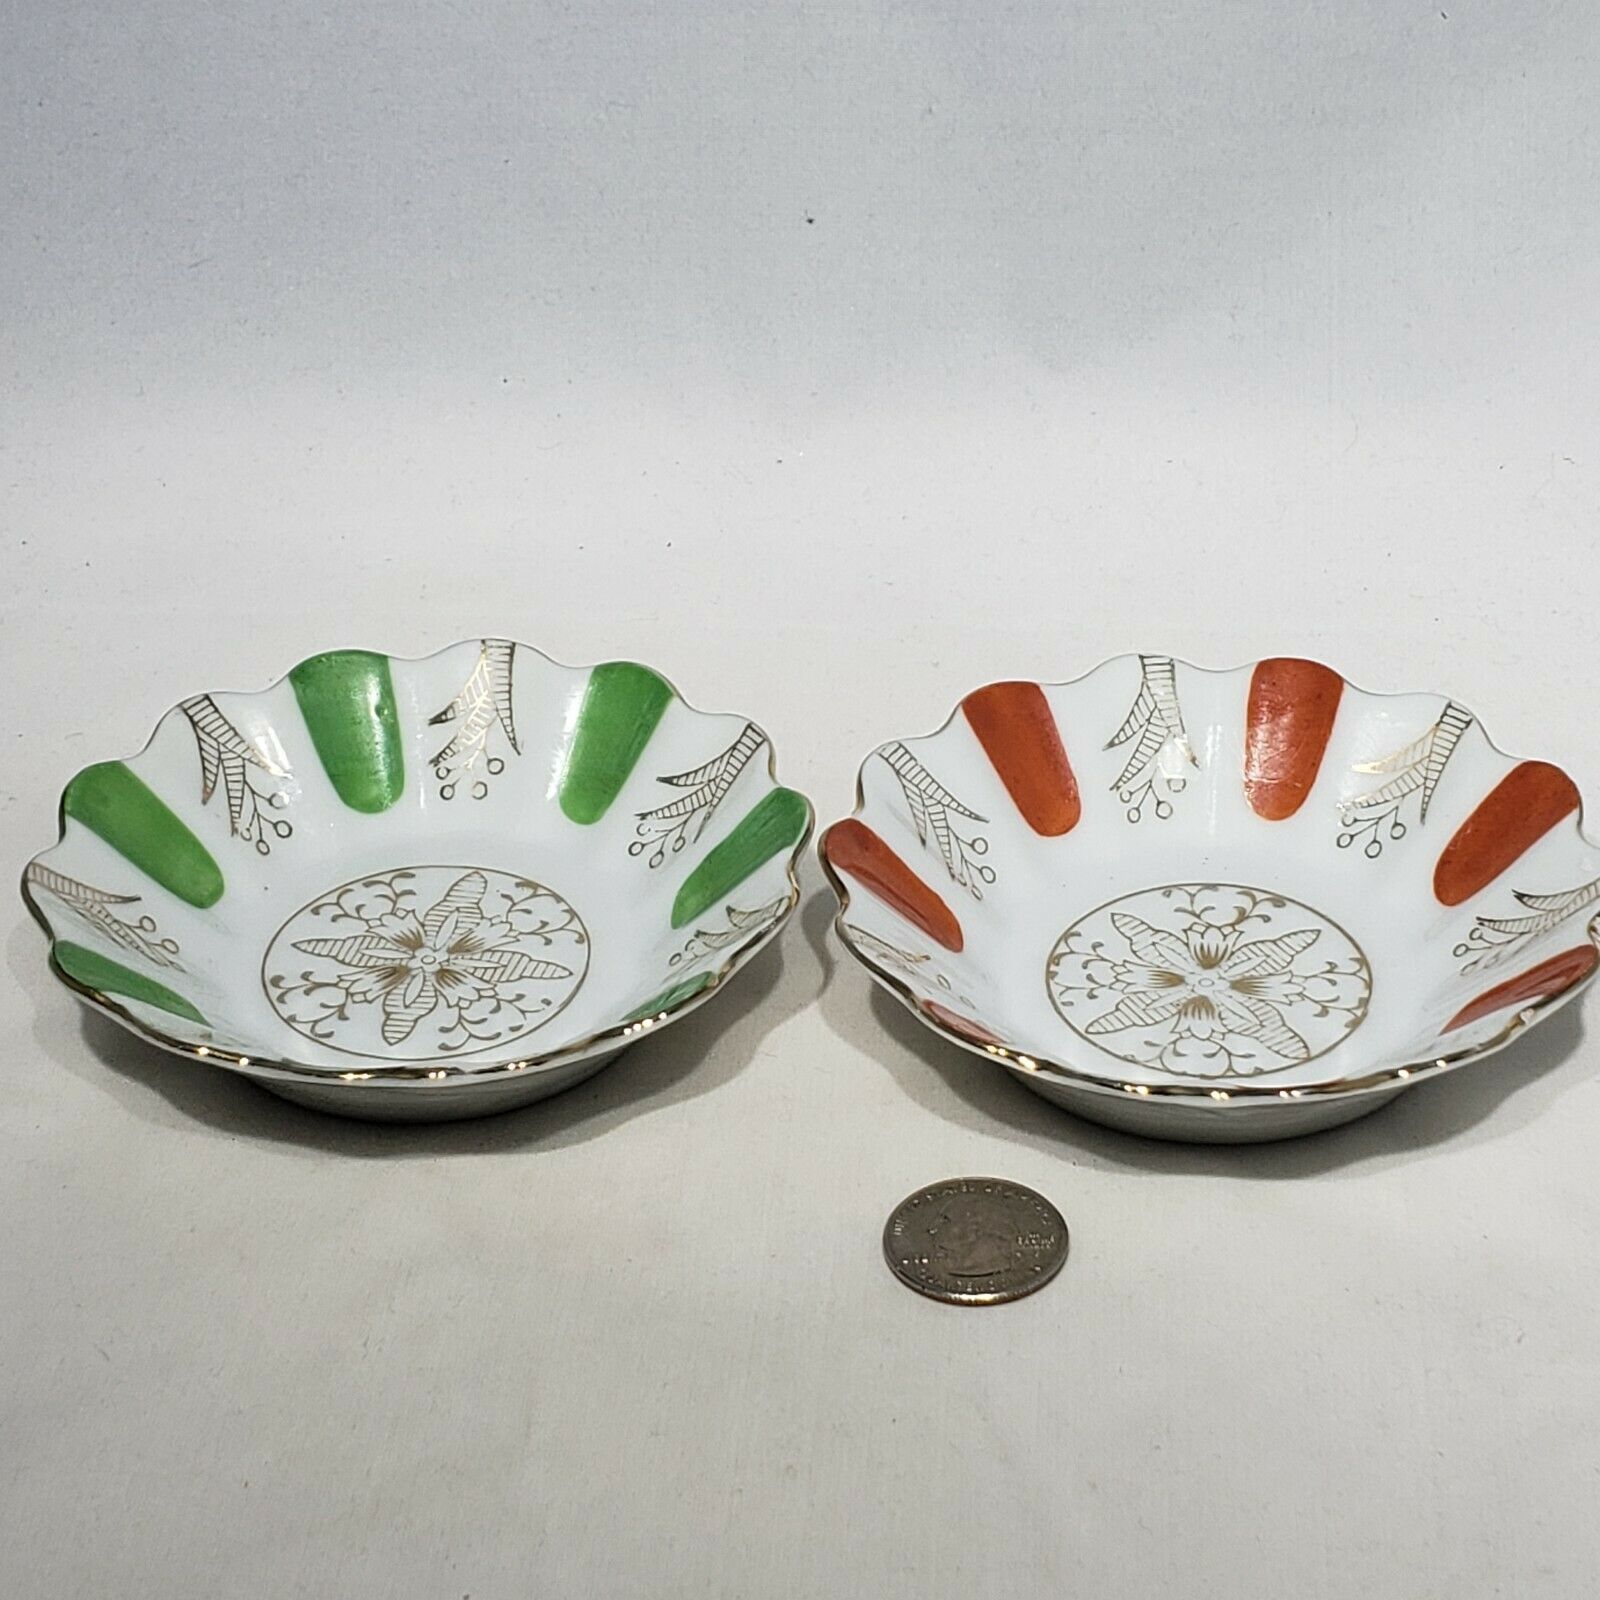 Primary image for Set of 2 Hand Painted 4.25" Bowls Dishes Occupied Japan SAMPLE W Wreath Mark EUC